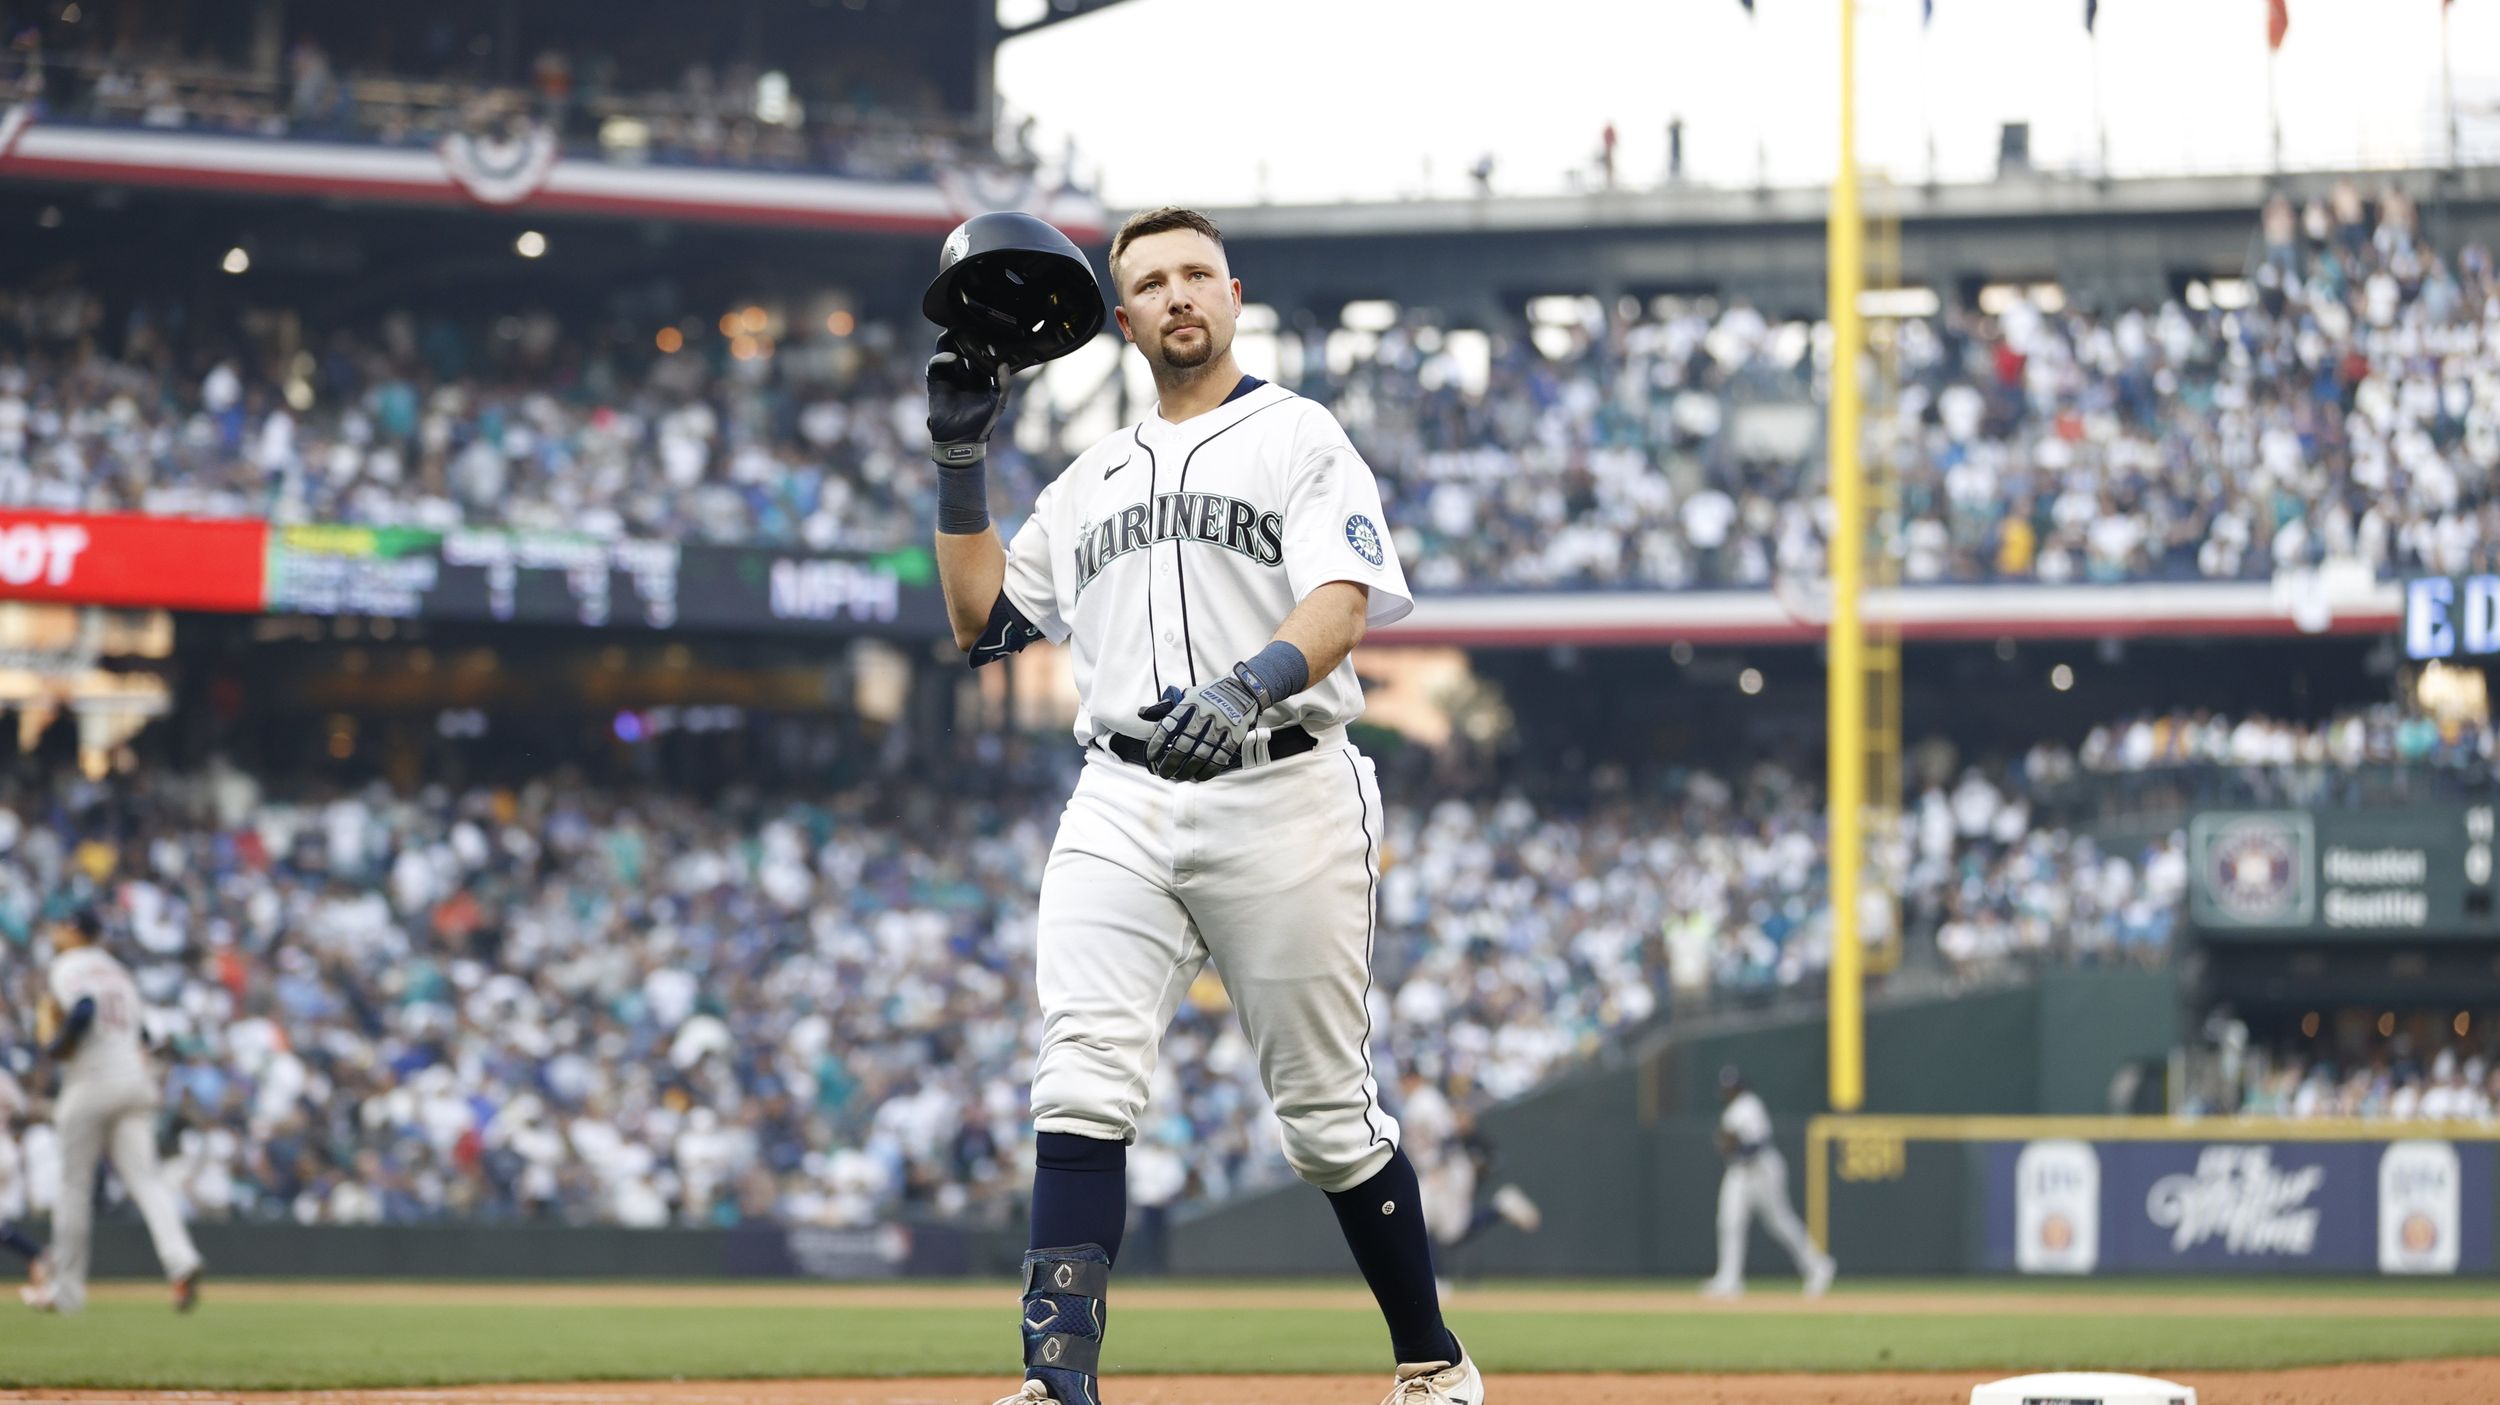 Cal Raleigh implores Mariners to get better, show commitment to